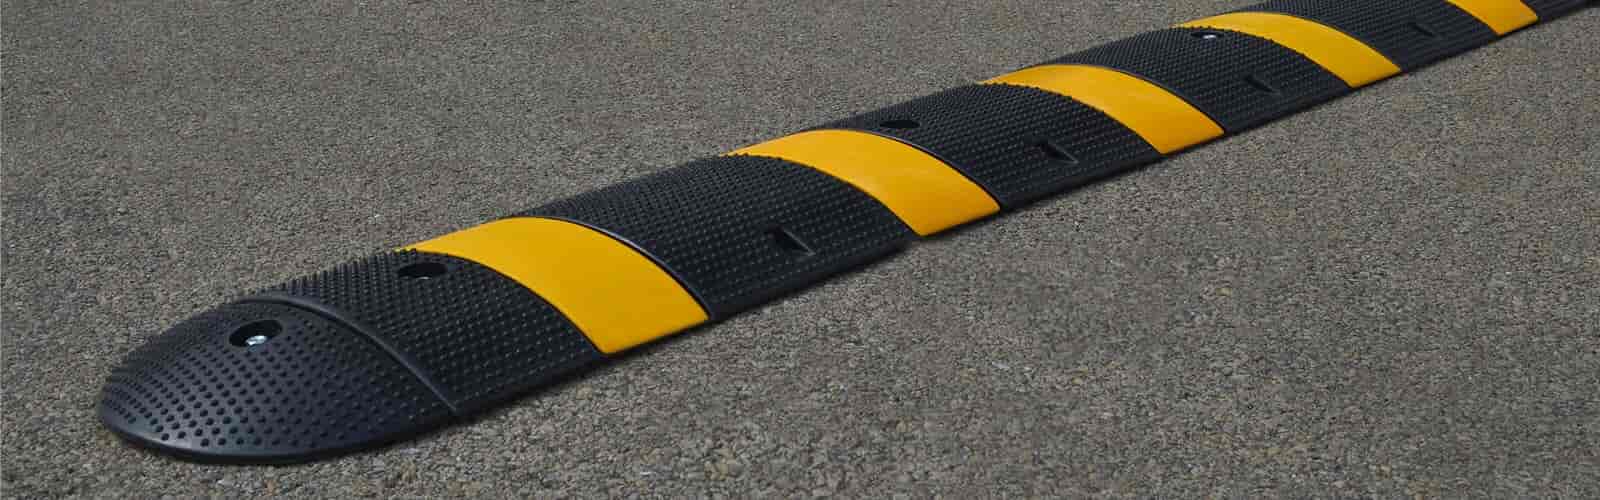 Speed Bumps & Humps